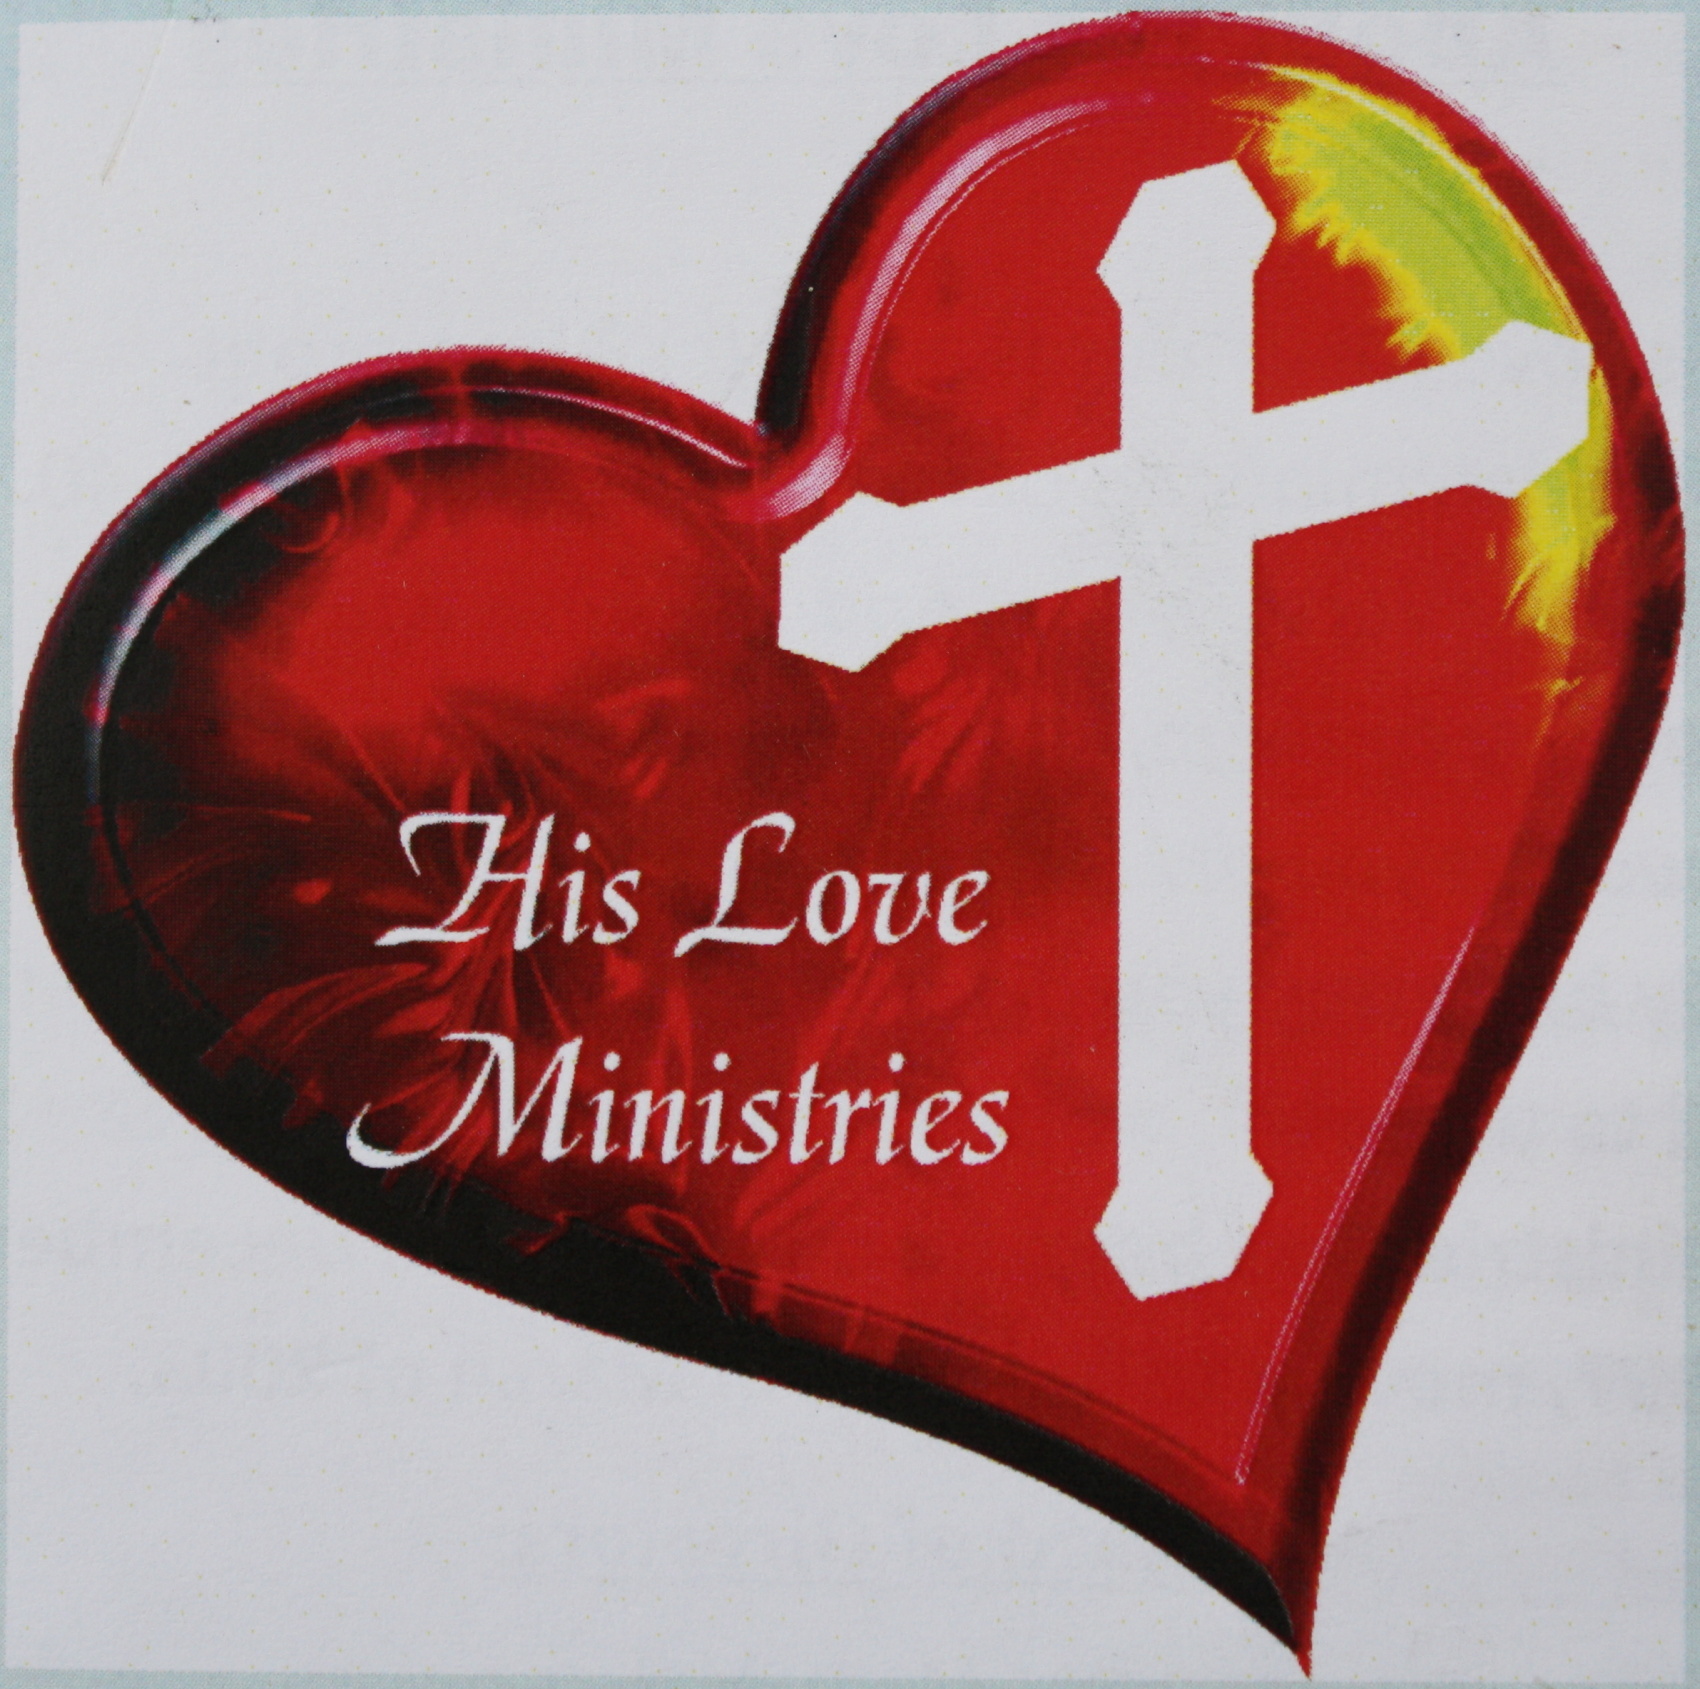 Check Out How God Is Using His Love Ministries - Help His Love Ministries Reach the Forgotten Newsletter